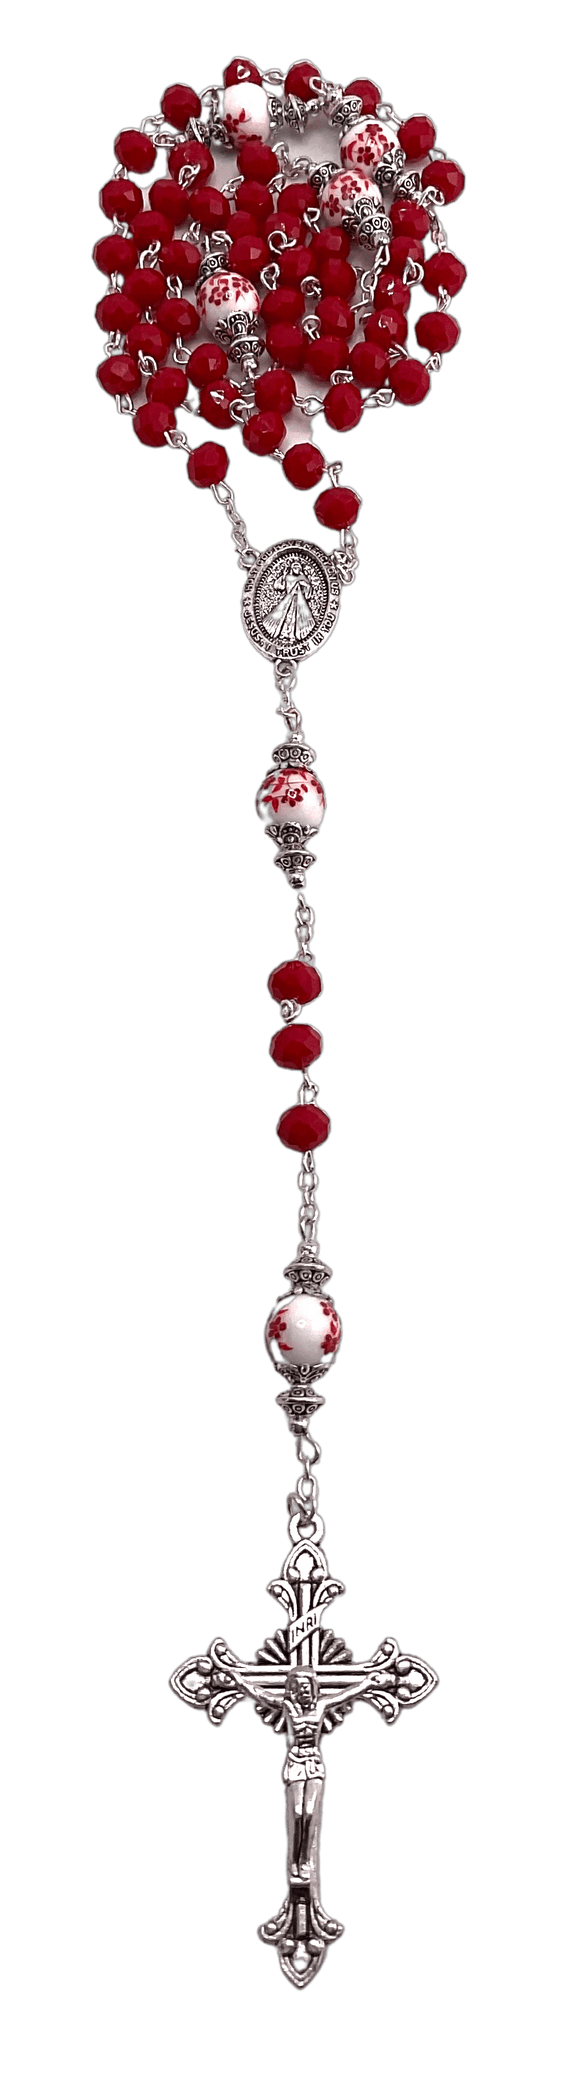 Divine Mercy Rosary With Florentine Beads, Sister Dulce Gift Shop, Catholic Store, Religious Store